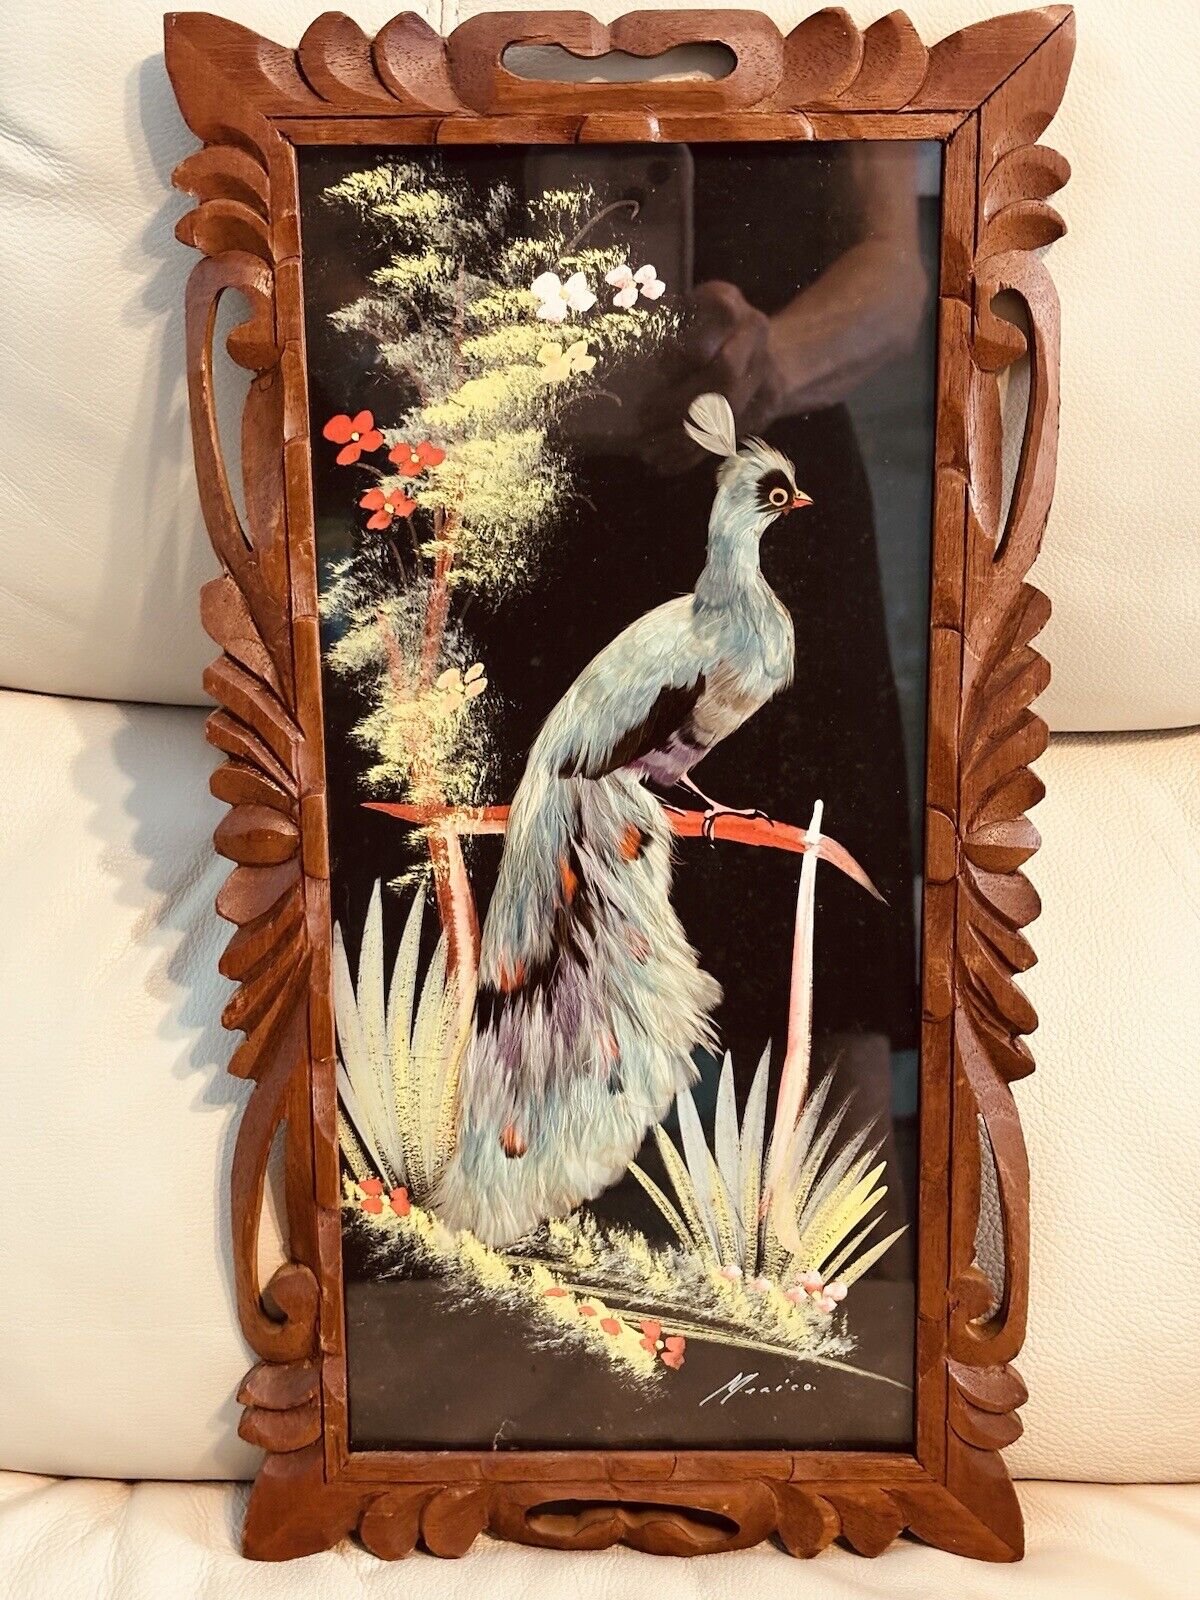 1950s VINTAGE MEXICAN FEATHER ART WHITE PEACOCK MOUNTED - BEAUTIFUL CARVED FRAME